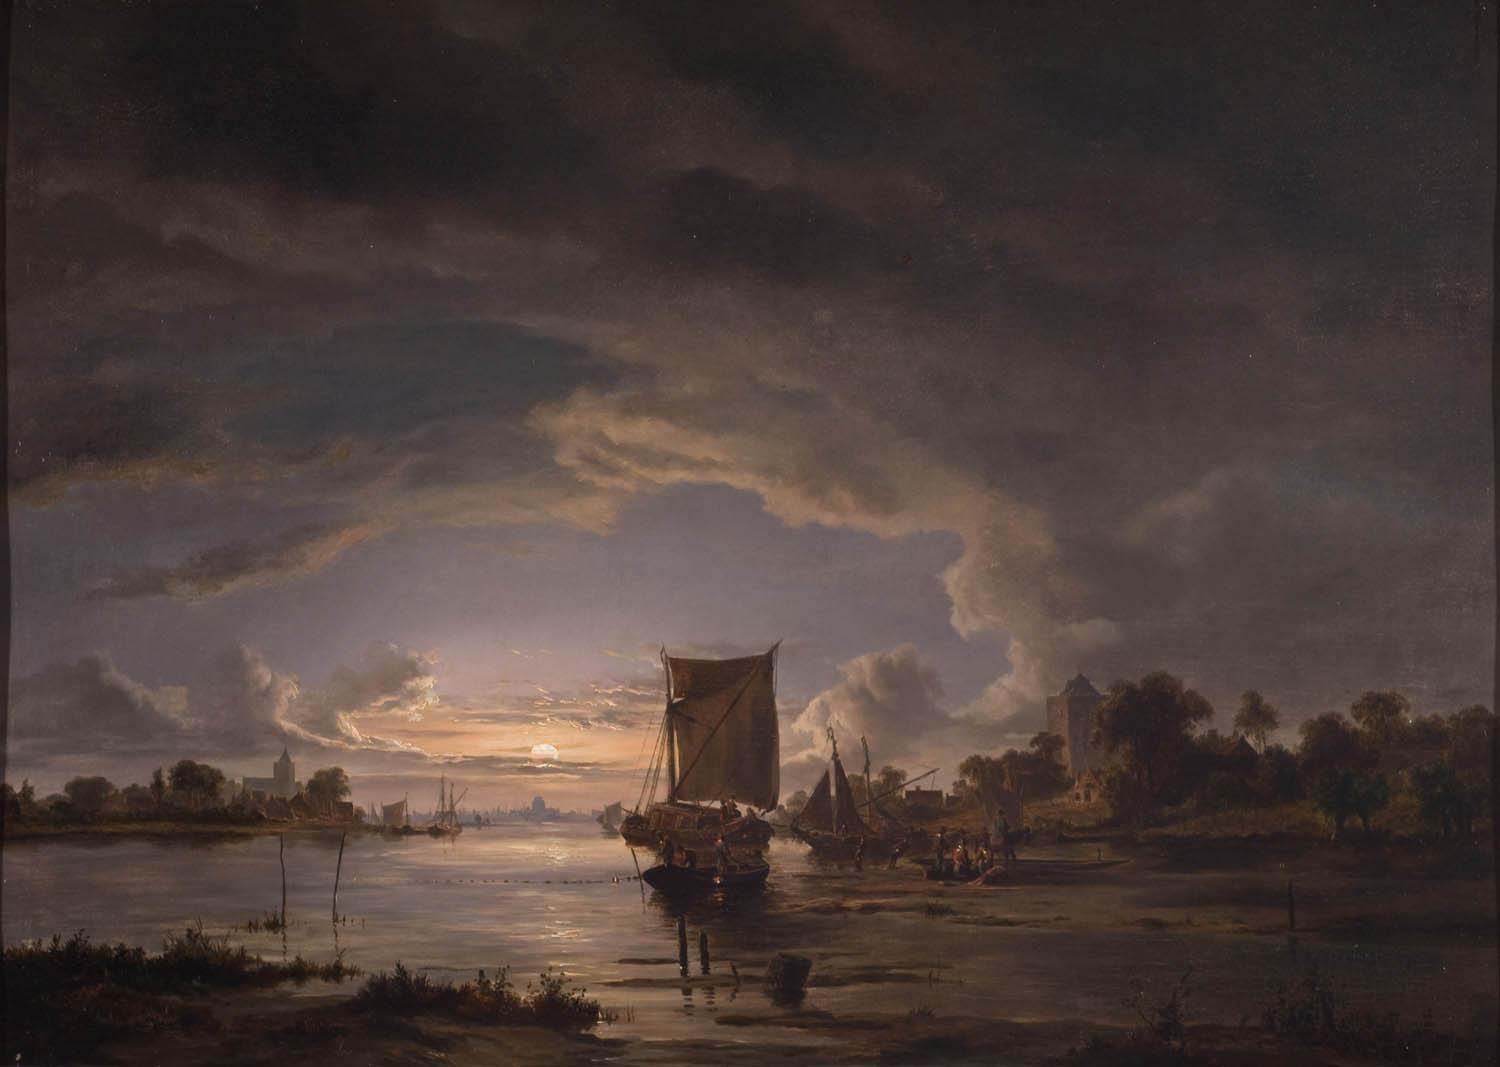 An Extensive River Scene with Sailboat